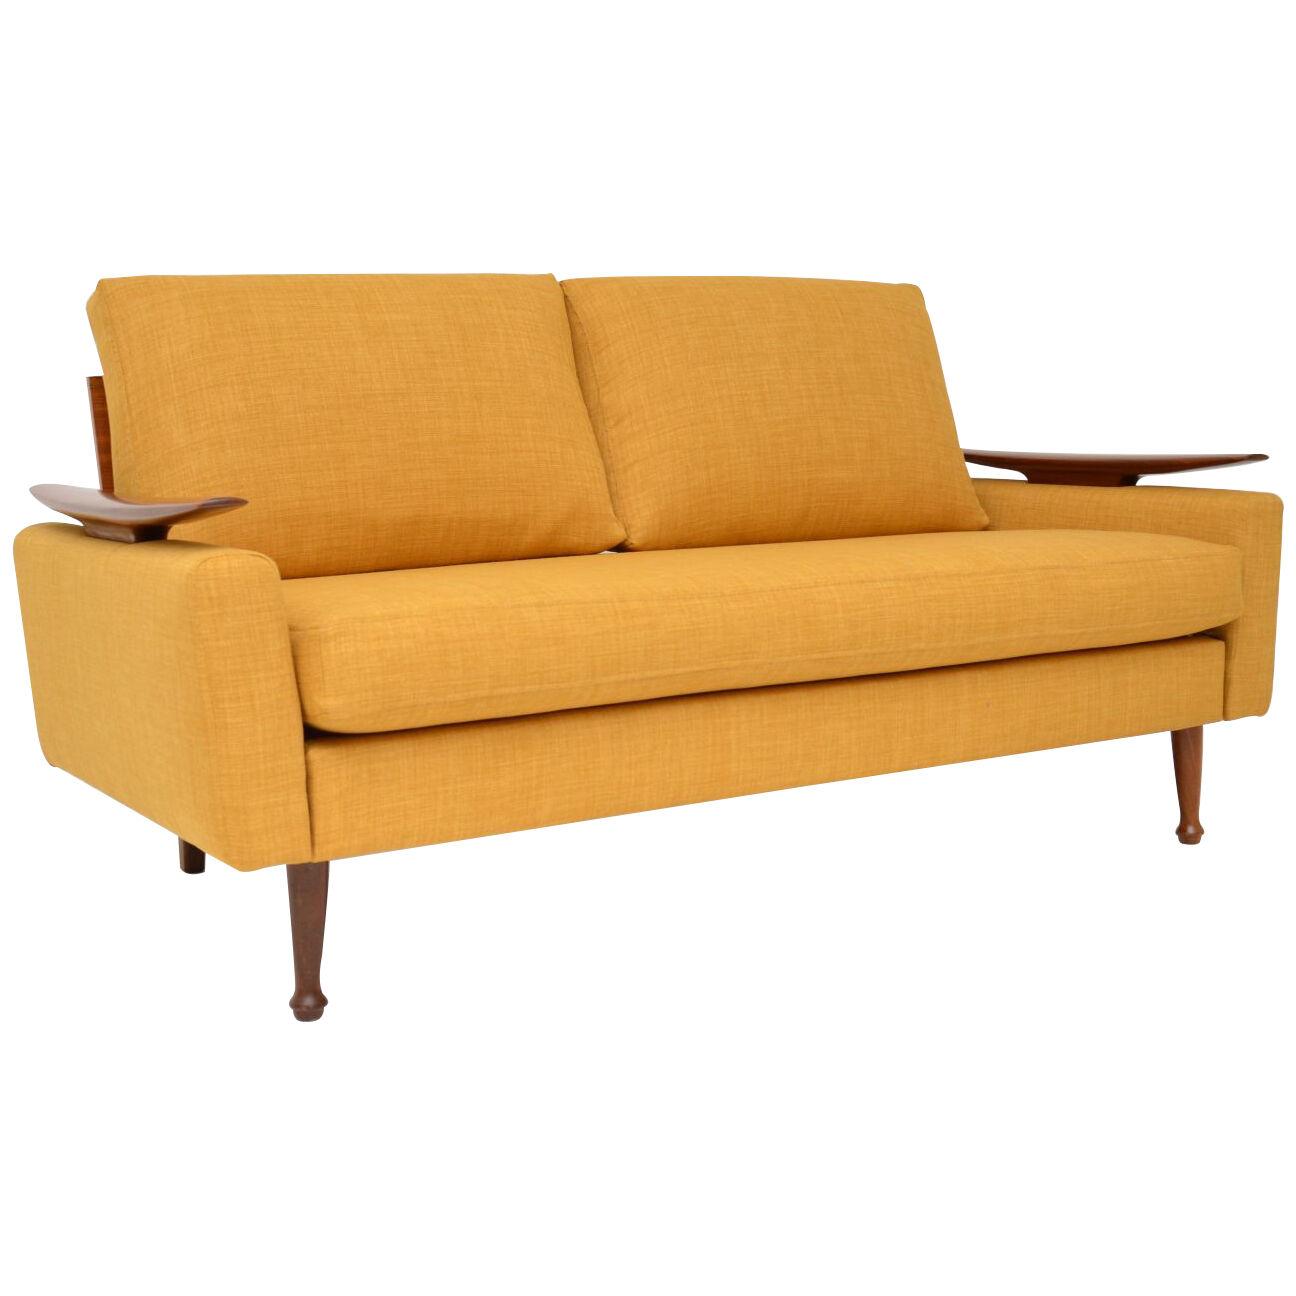 1960's Vintage Sofa Bed by Greaves & Thomas